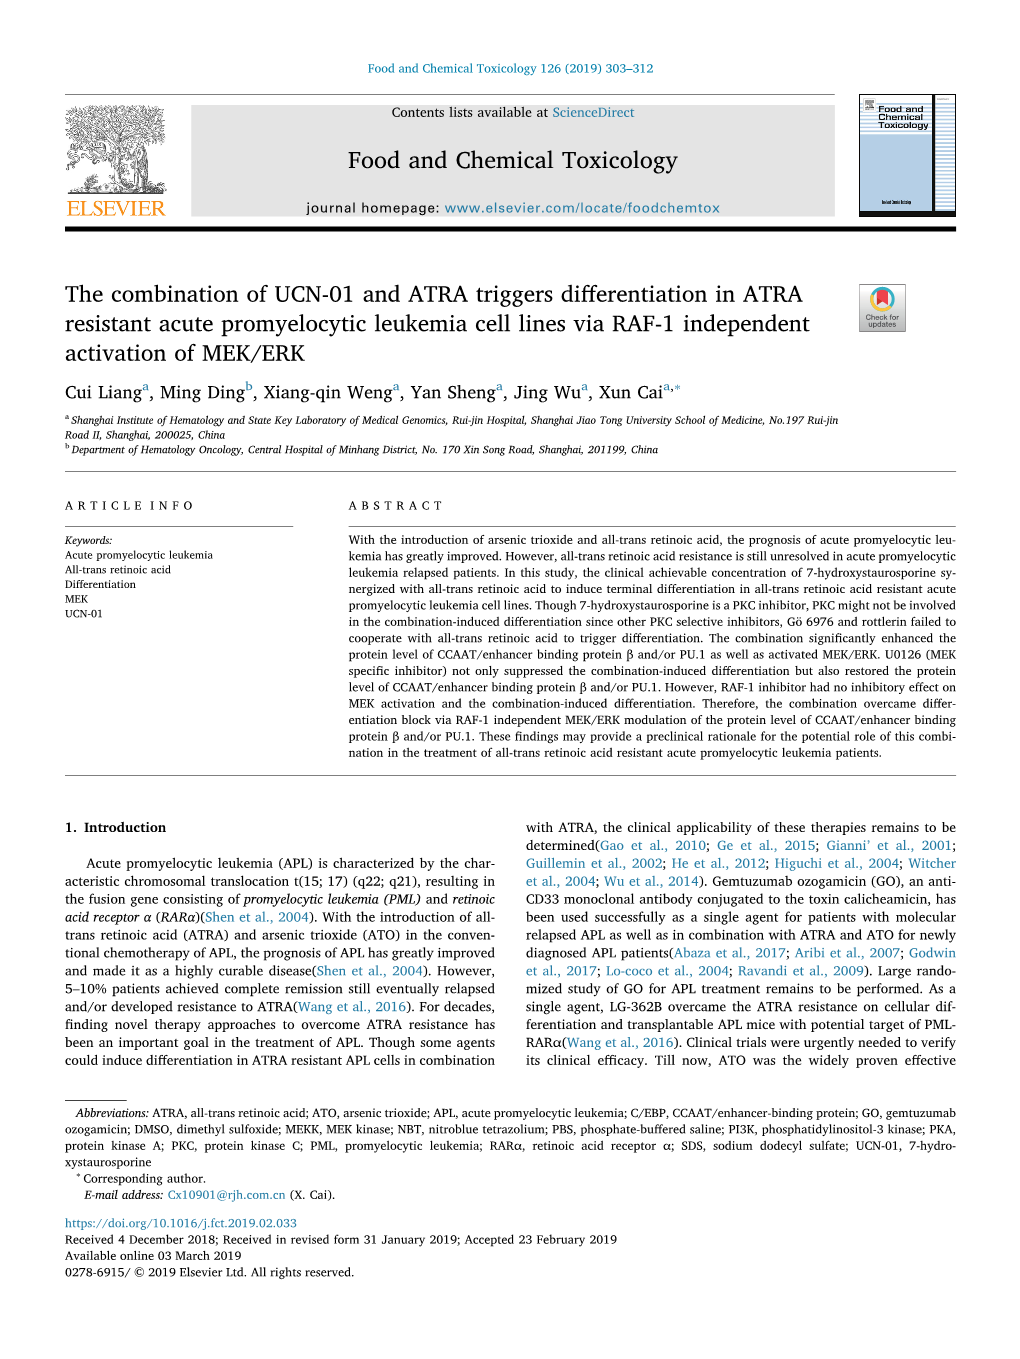 The Combination of UCN-01 and ATRA Triggers Differentiation in ATRA Resistant Acute Promyelocytic Leukemia Cell Lines Via RAF-1